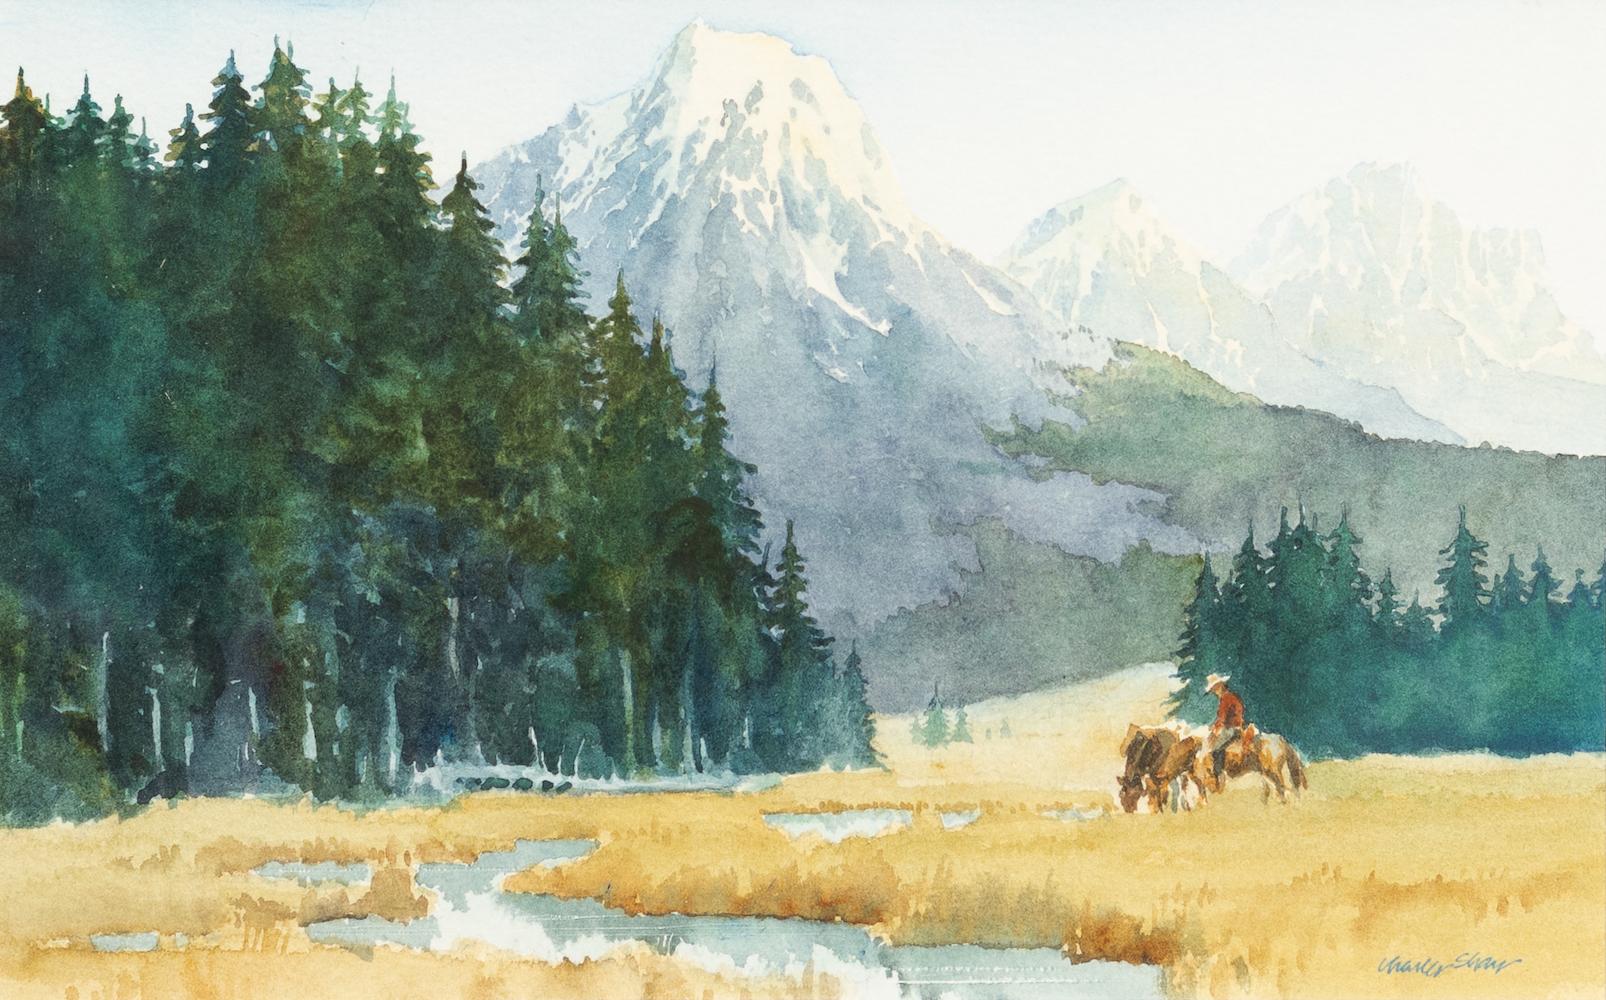 "Mountain Landscape with Cowboy" Stream Forest Horses Grass Snow Capped Peaks